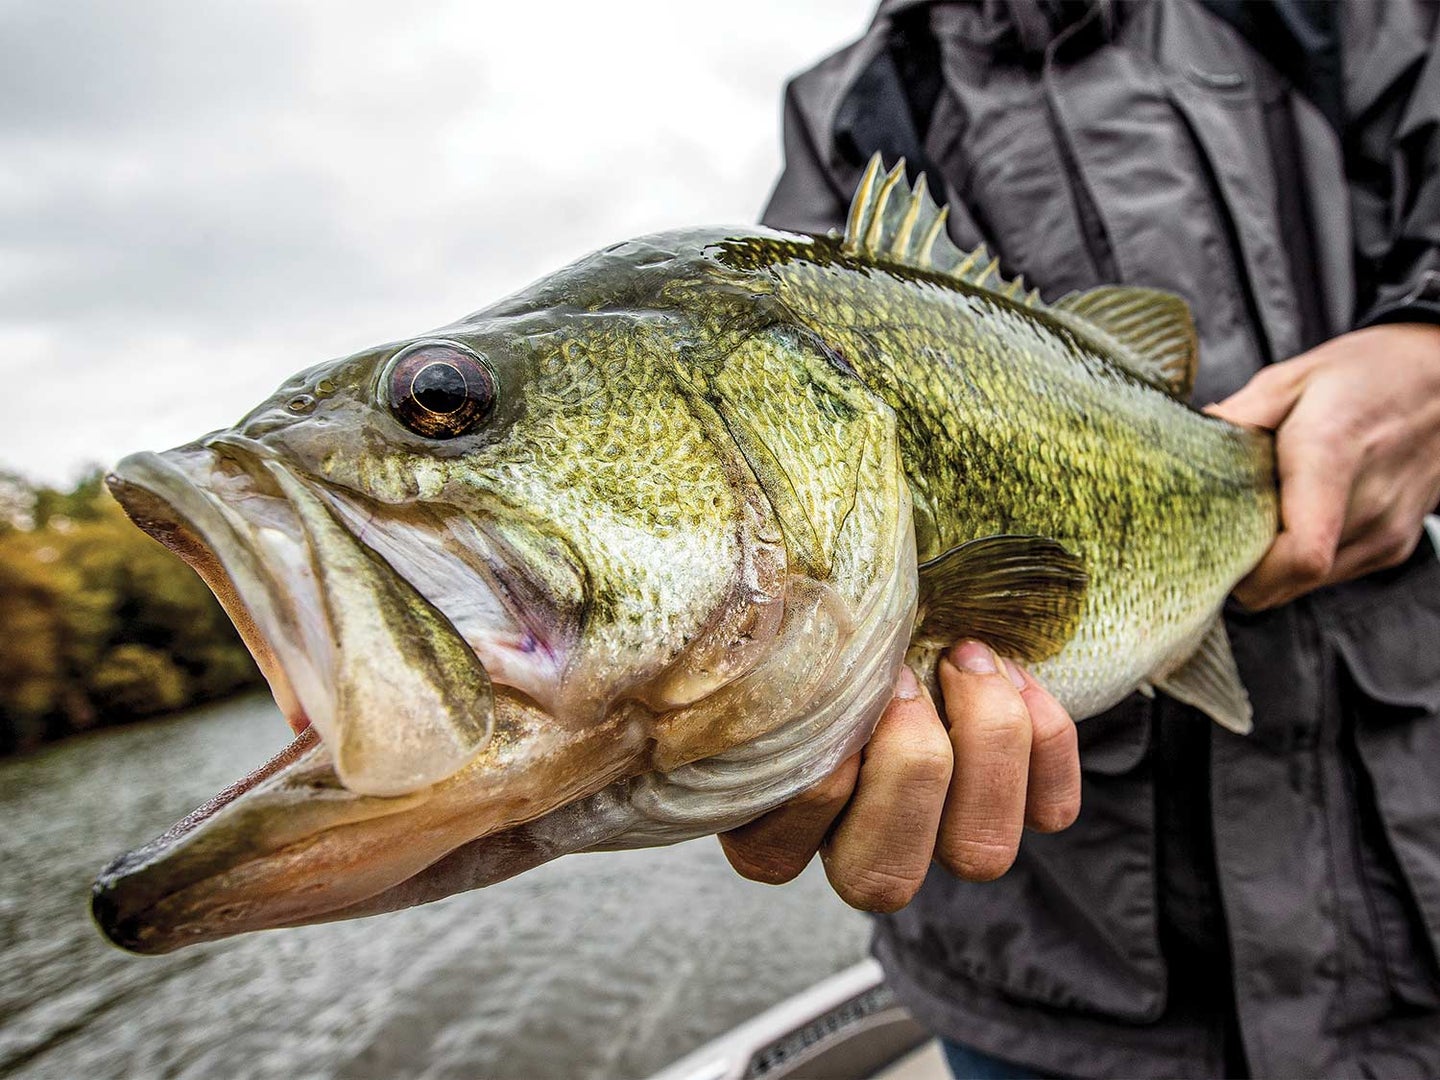 Fire Up for Fall Largemouths - In-Fisherman